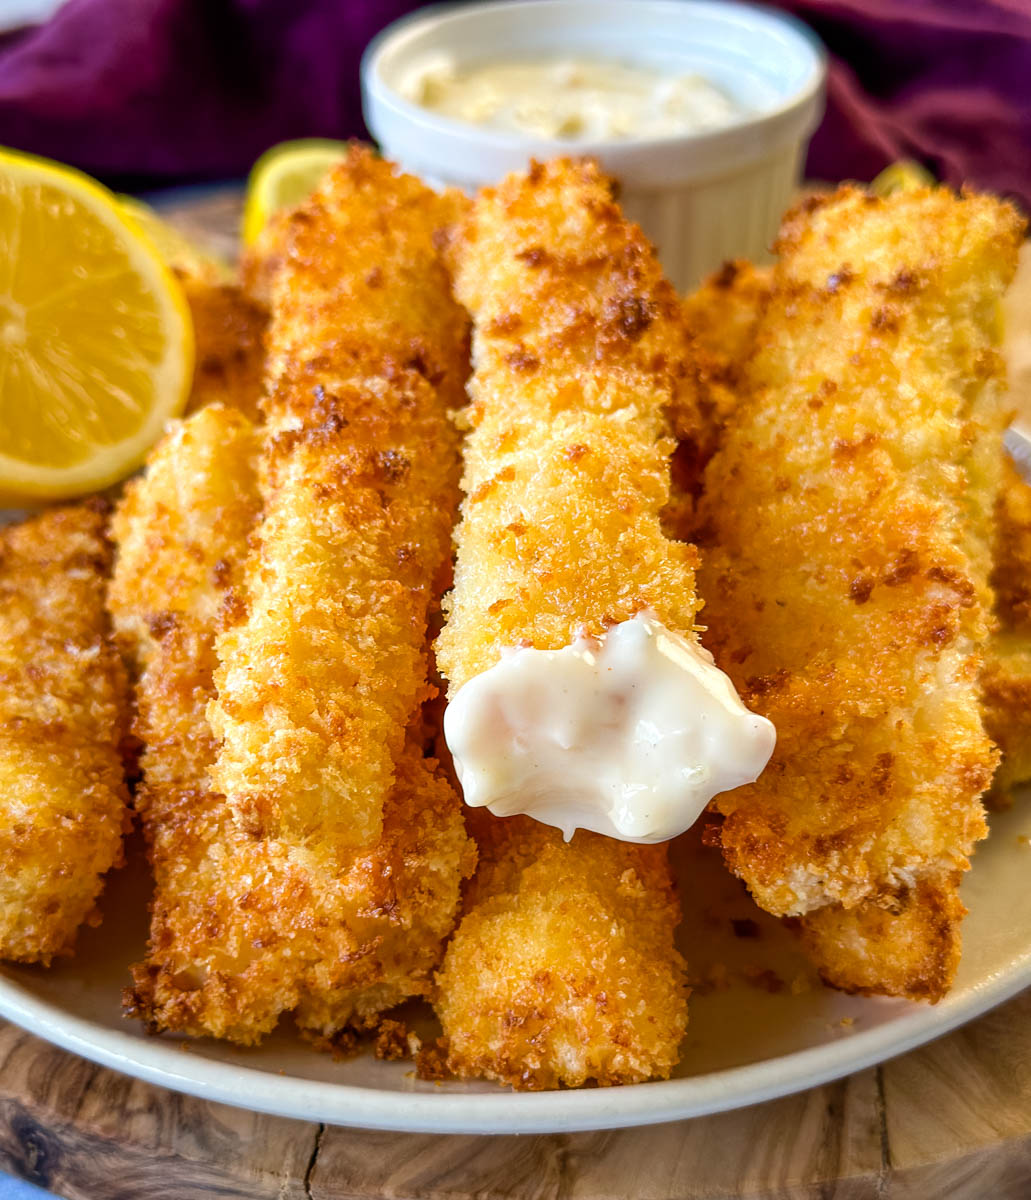 Homemade Fish Fingers - Simple Seafood Recipes